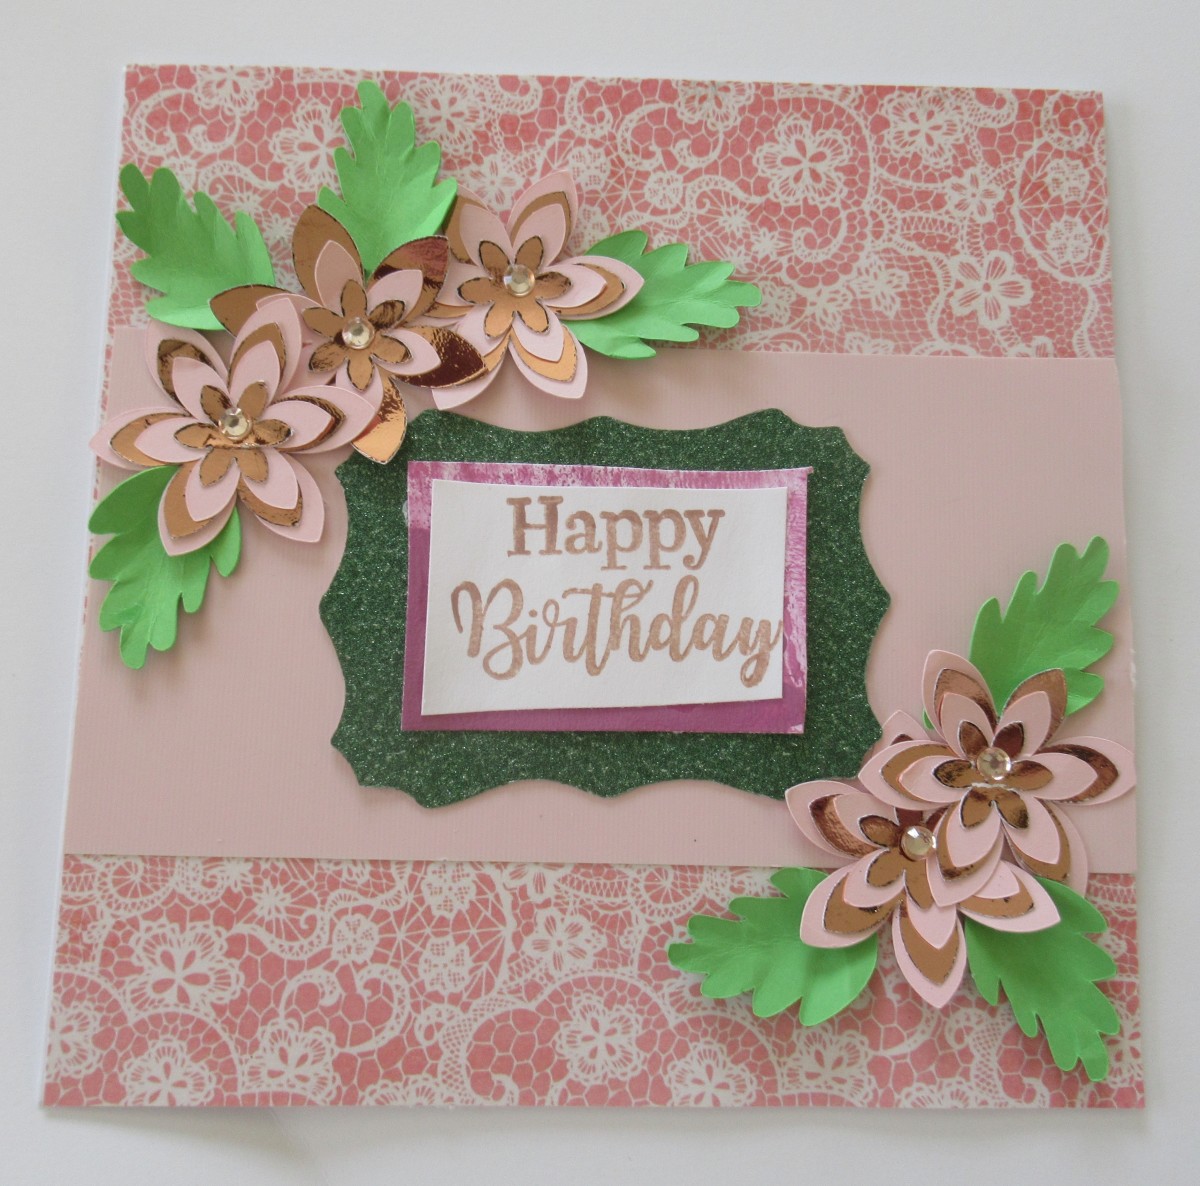 You can foil elements and embellishments for cards and scrapbook pages